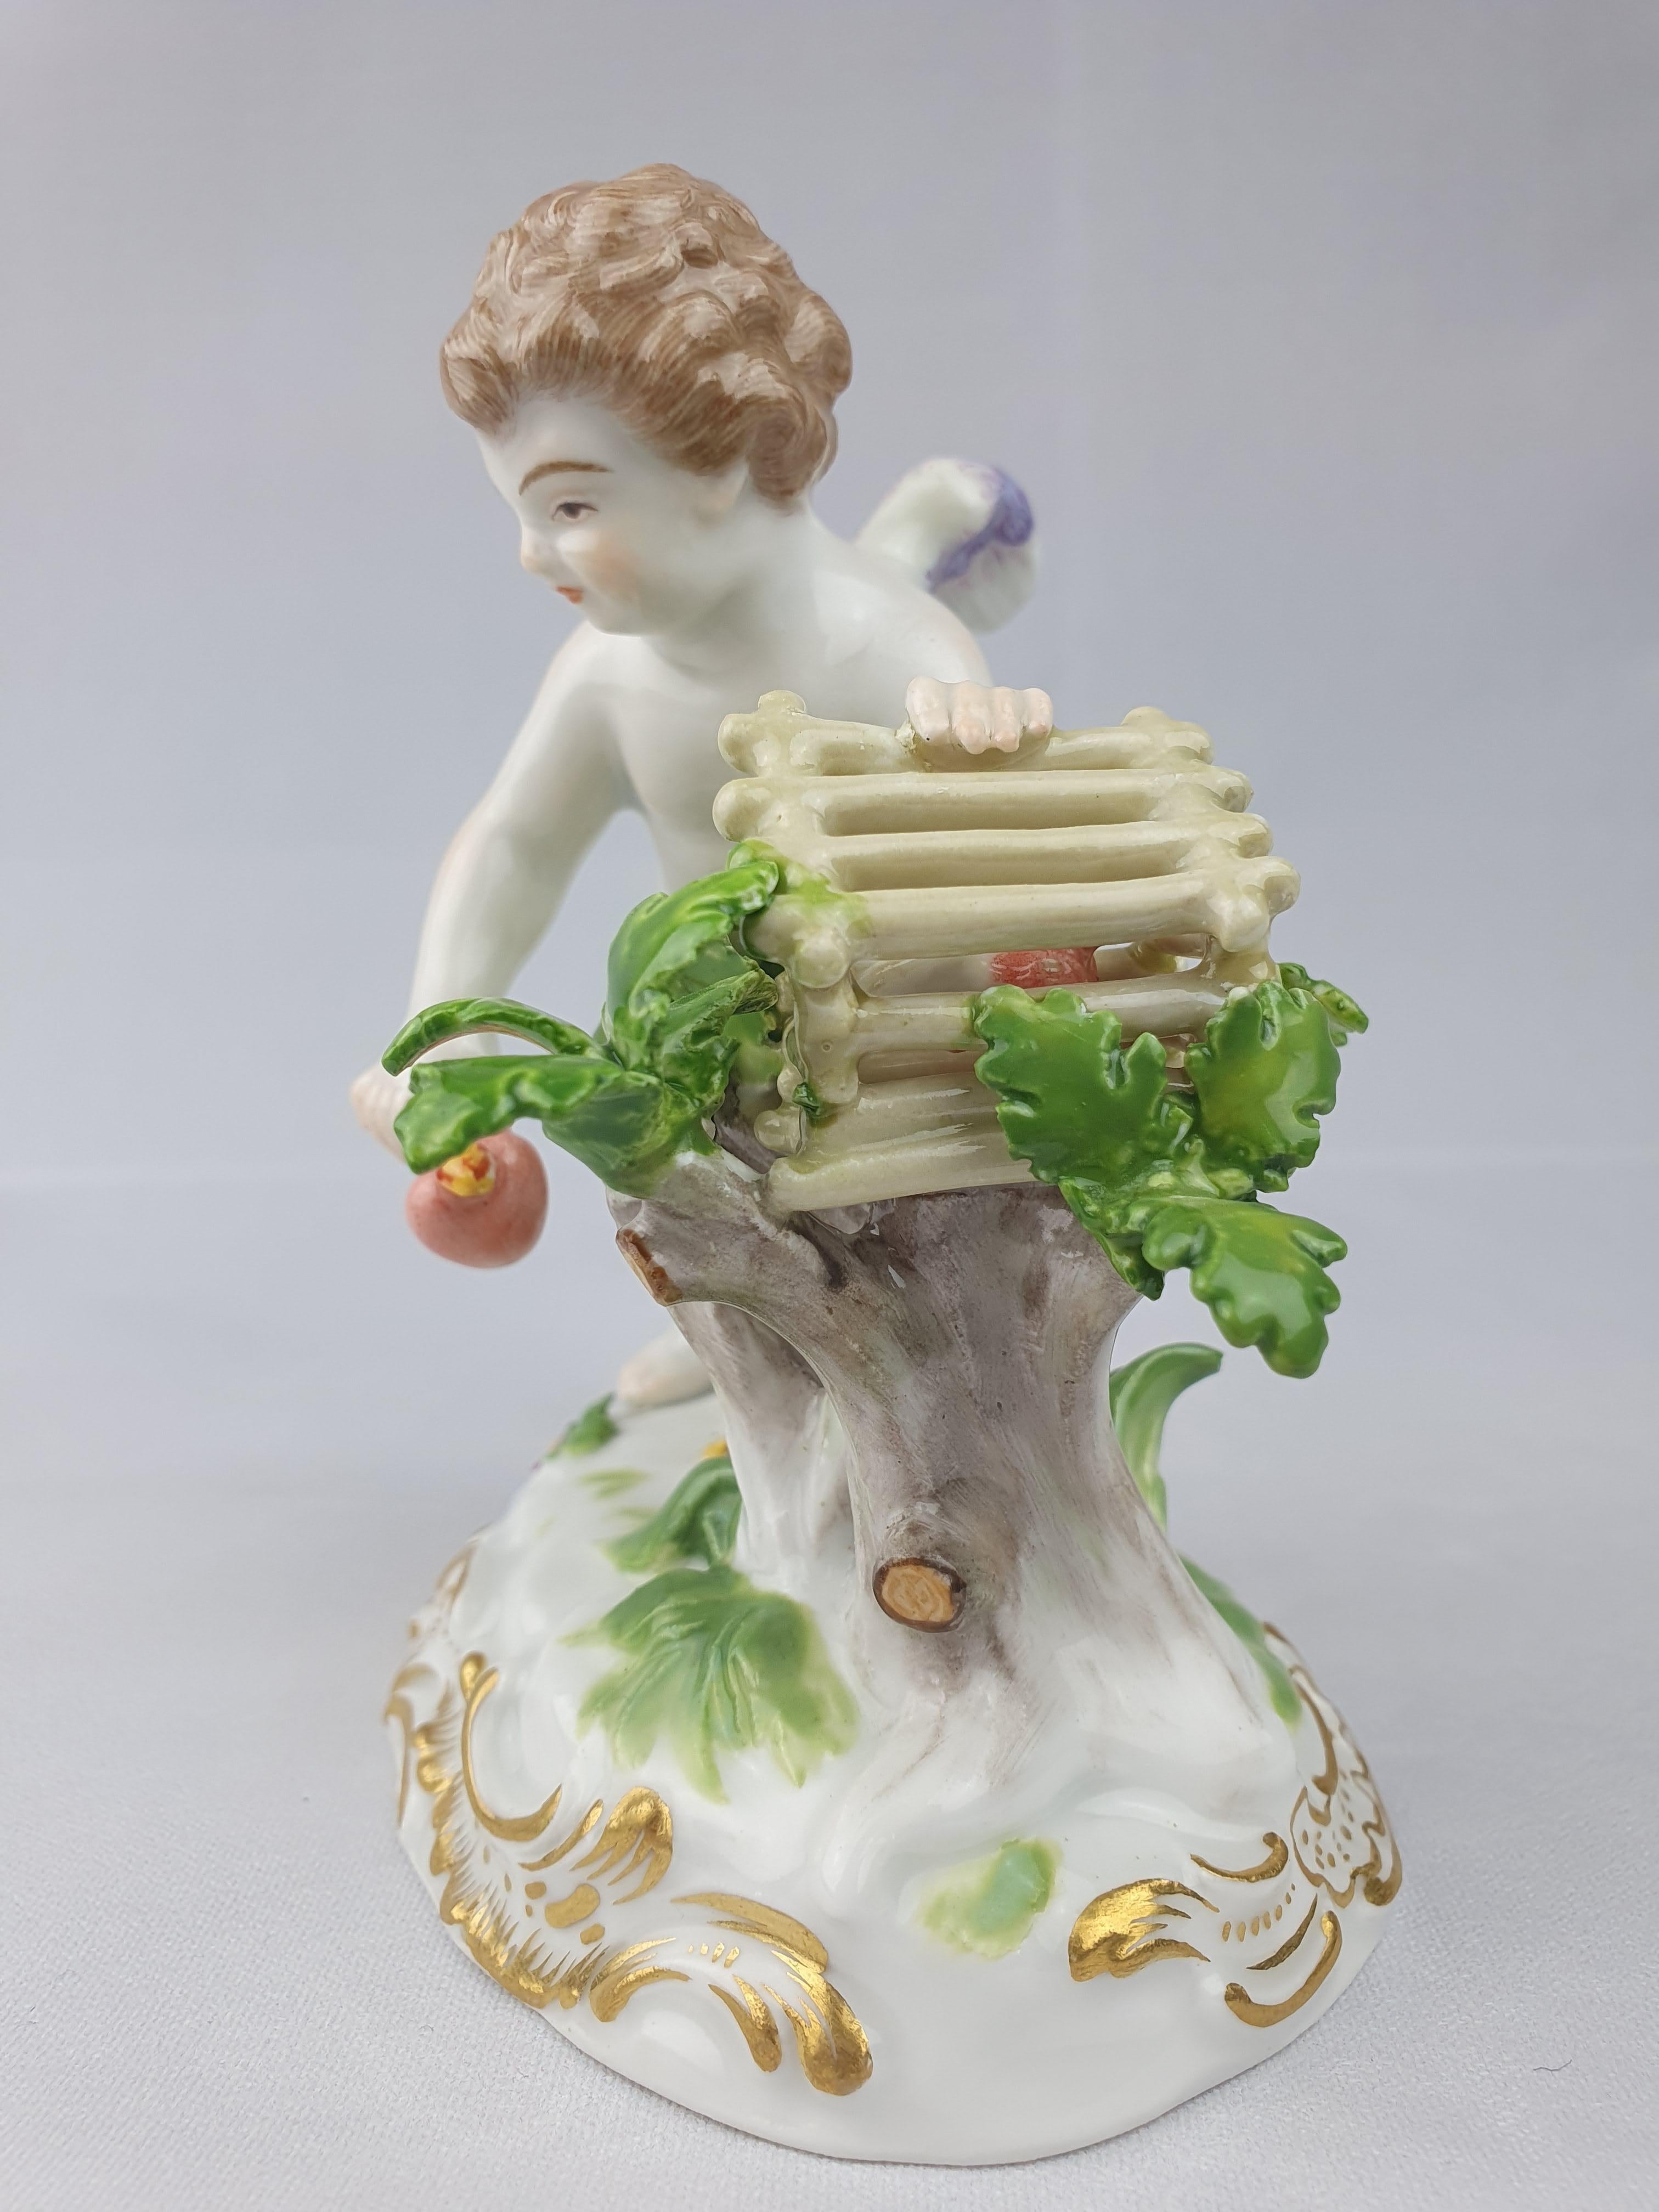 Meissen figure of cupid with flaming heart in wooden cage. Cross swords in underglaze blue. Incised model number O186.

circa 1890.

Height is 11.5cm.